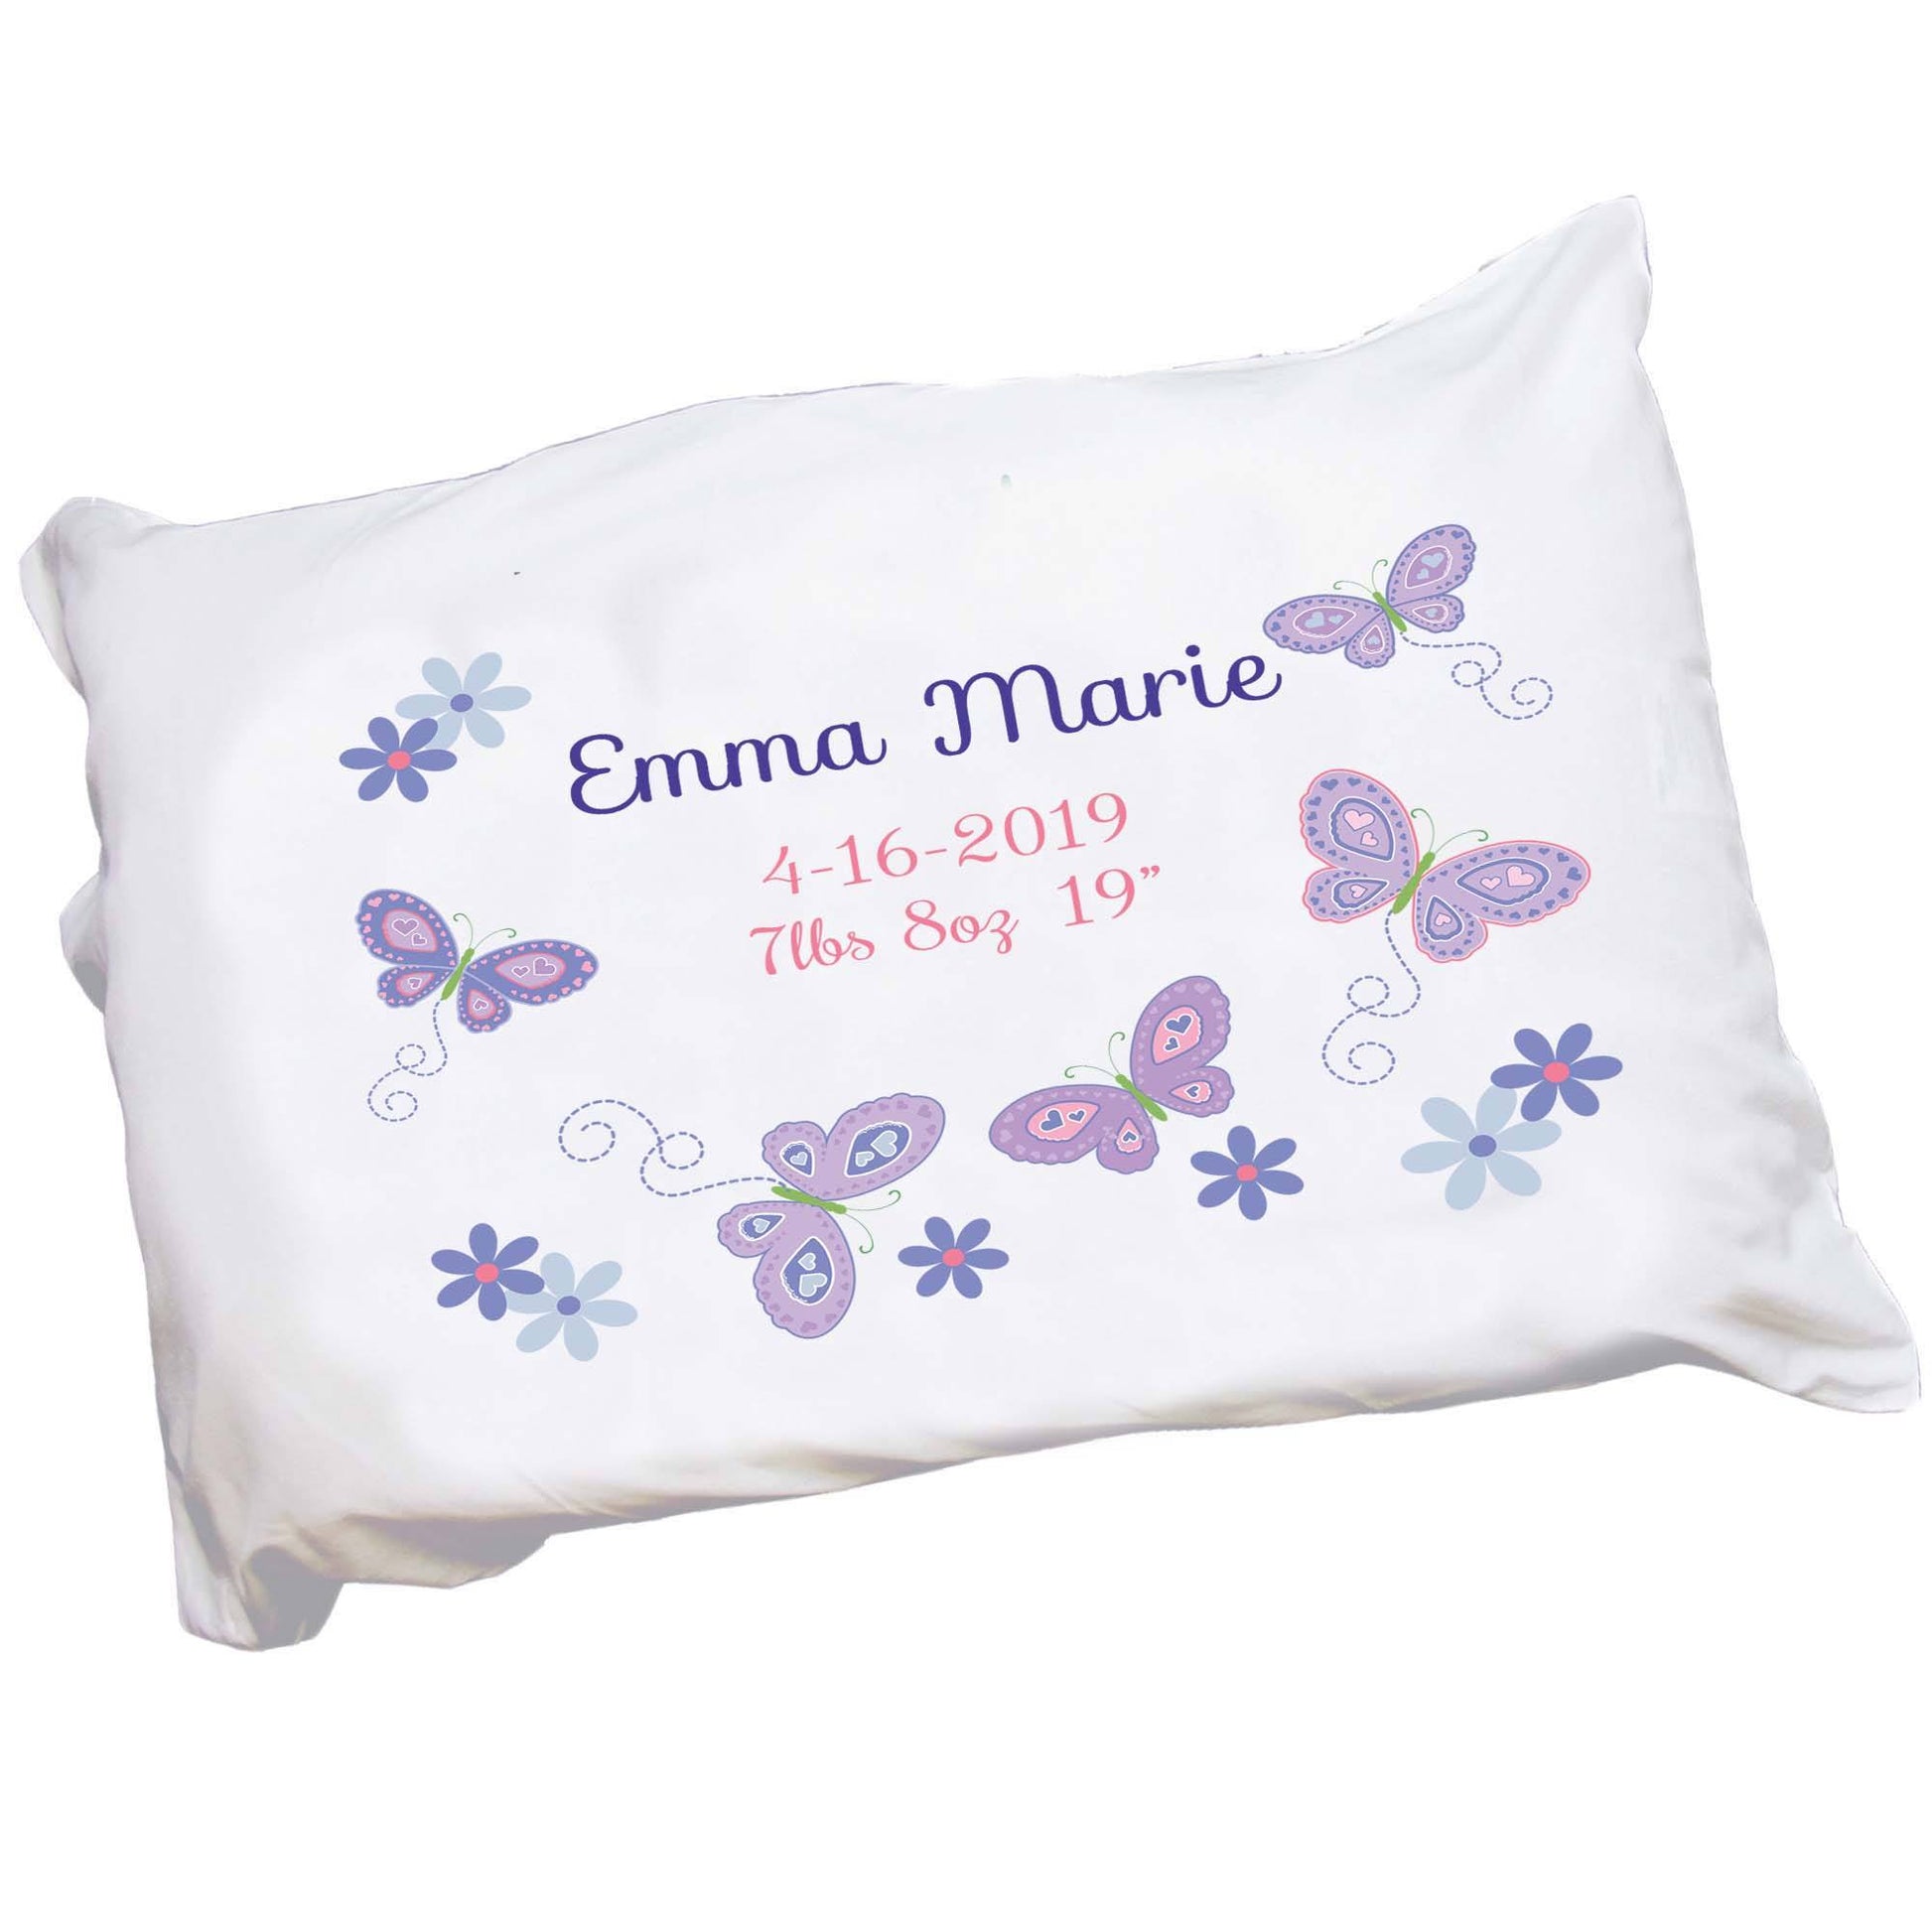 Personalized lavender purple butterfly Pillowcase